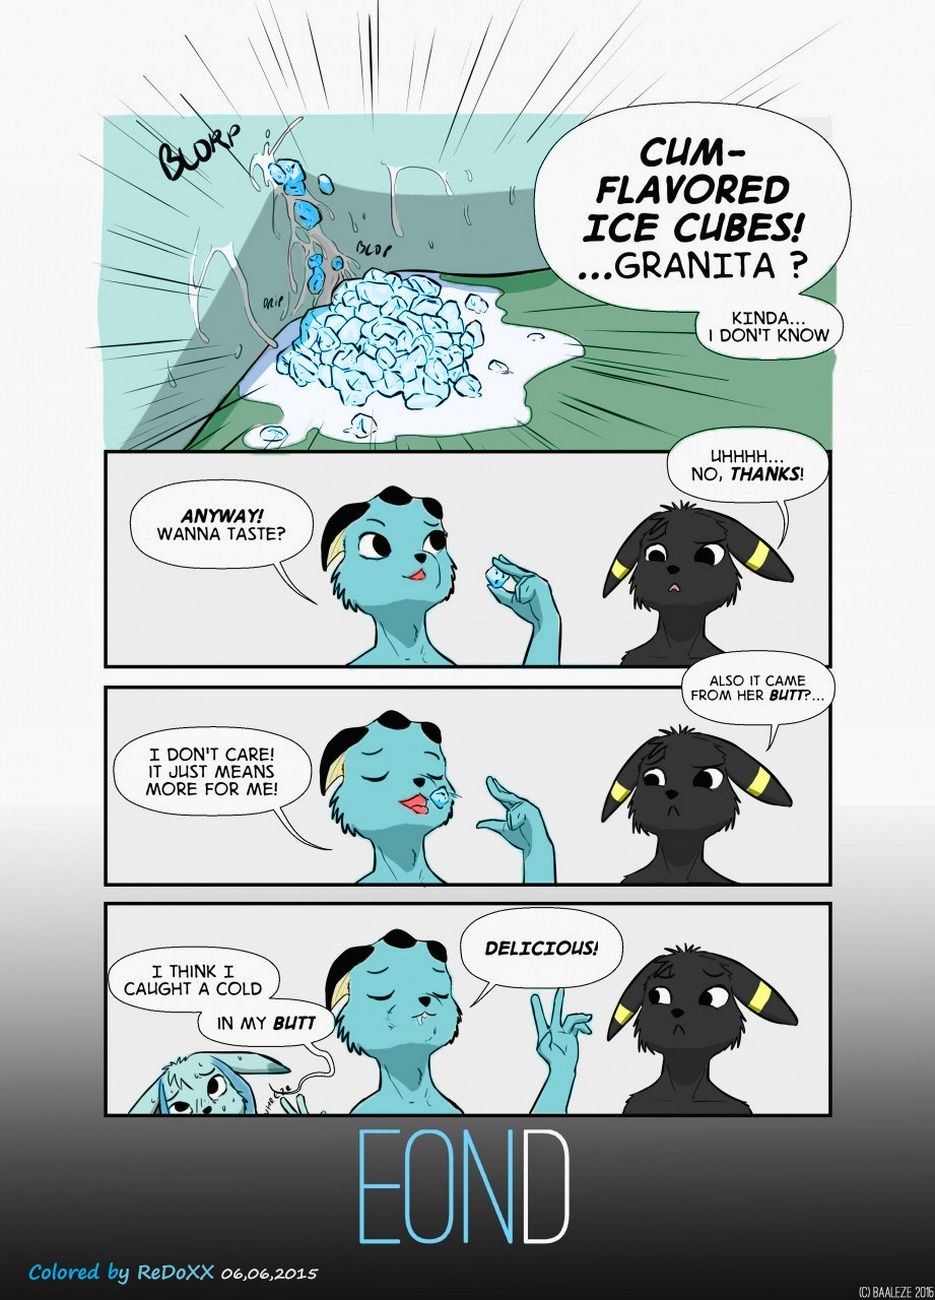 iceon page 1